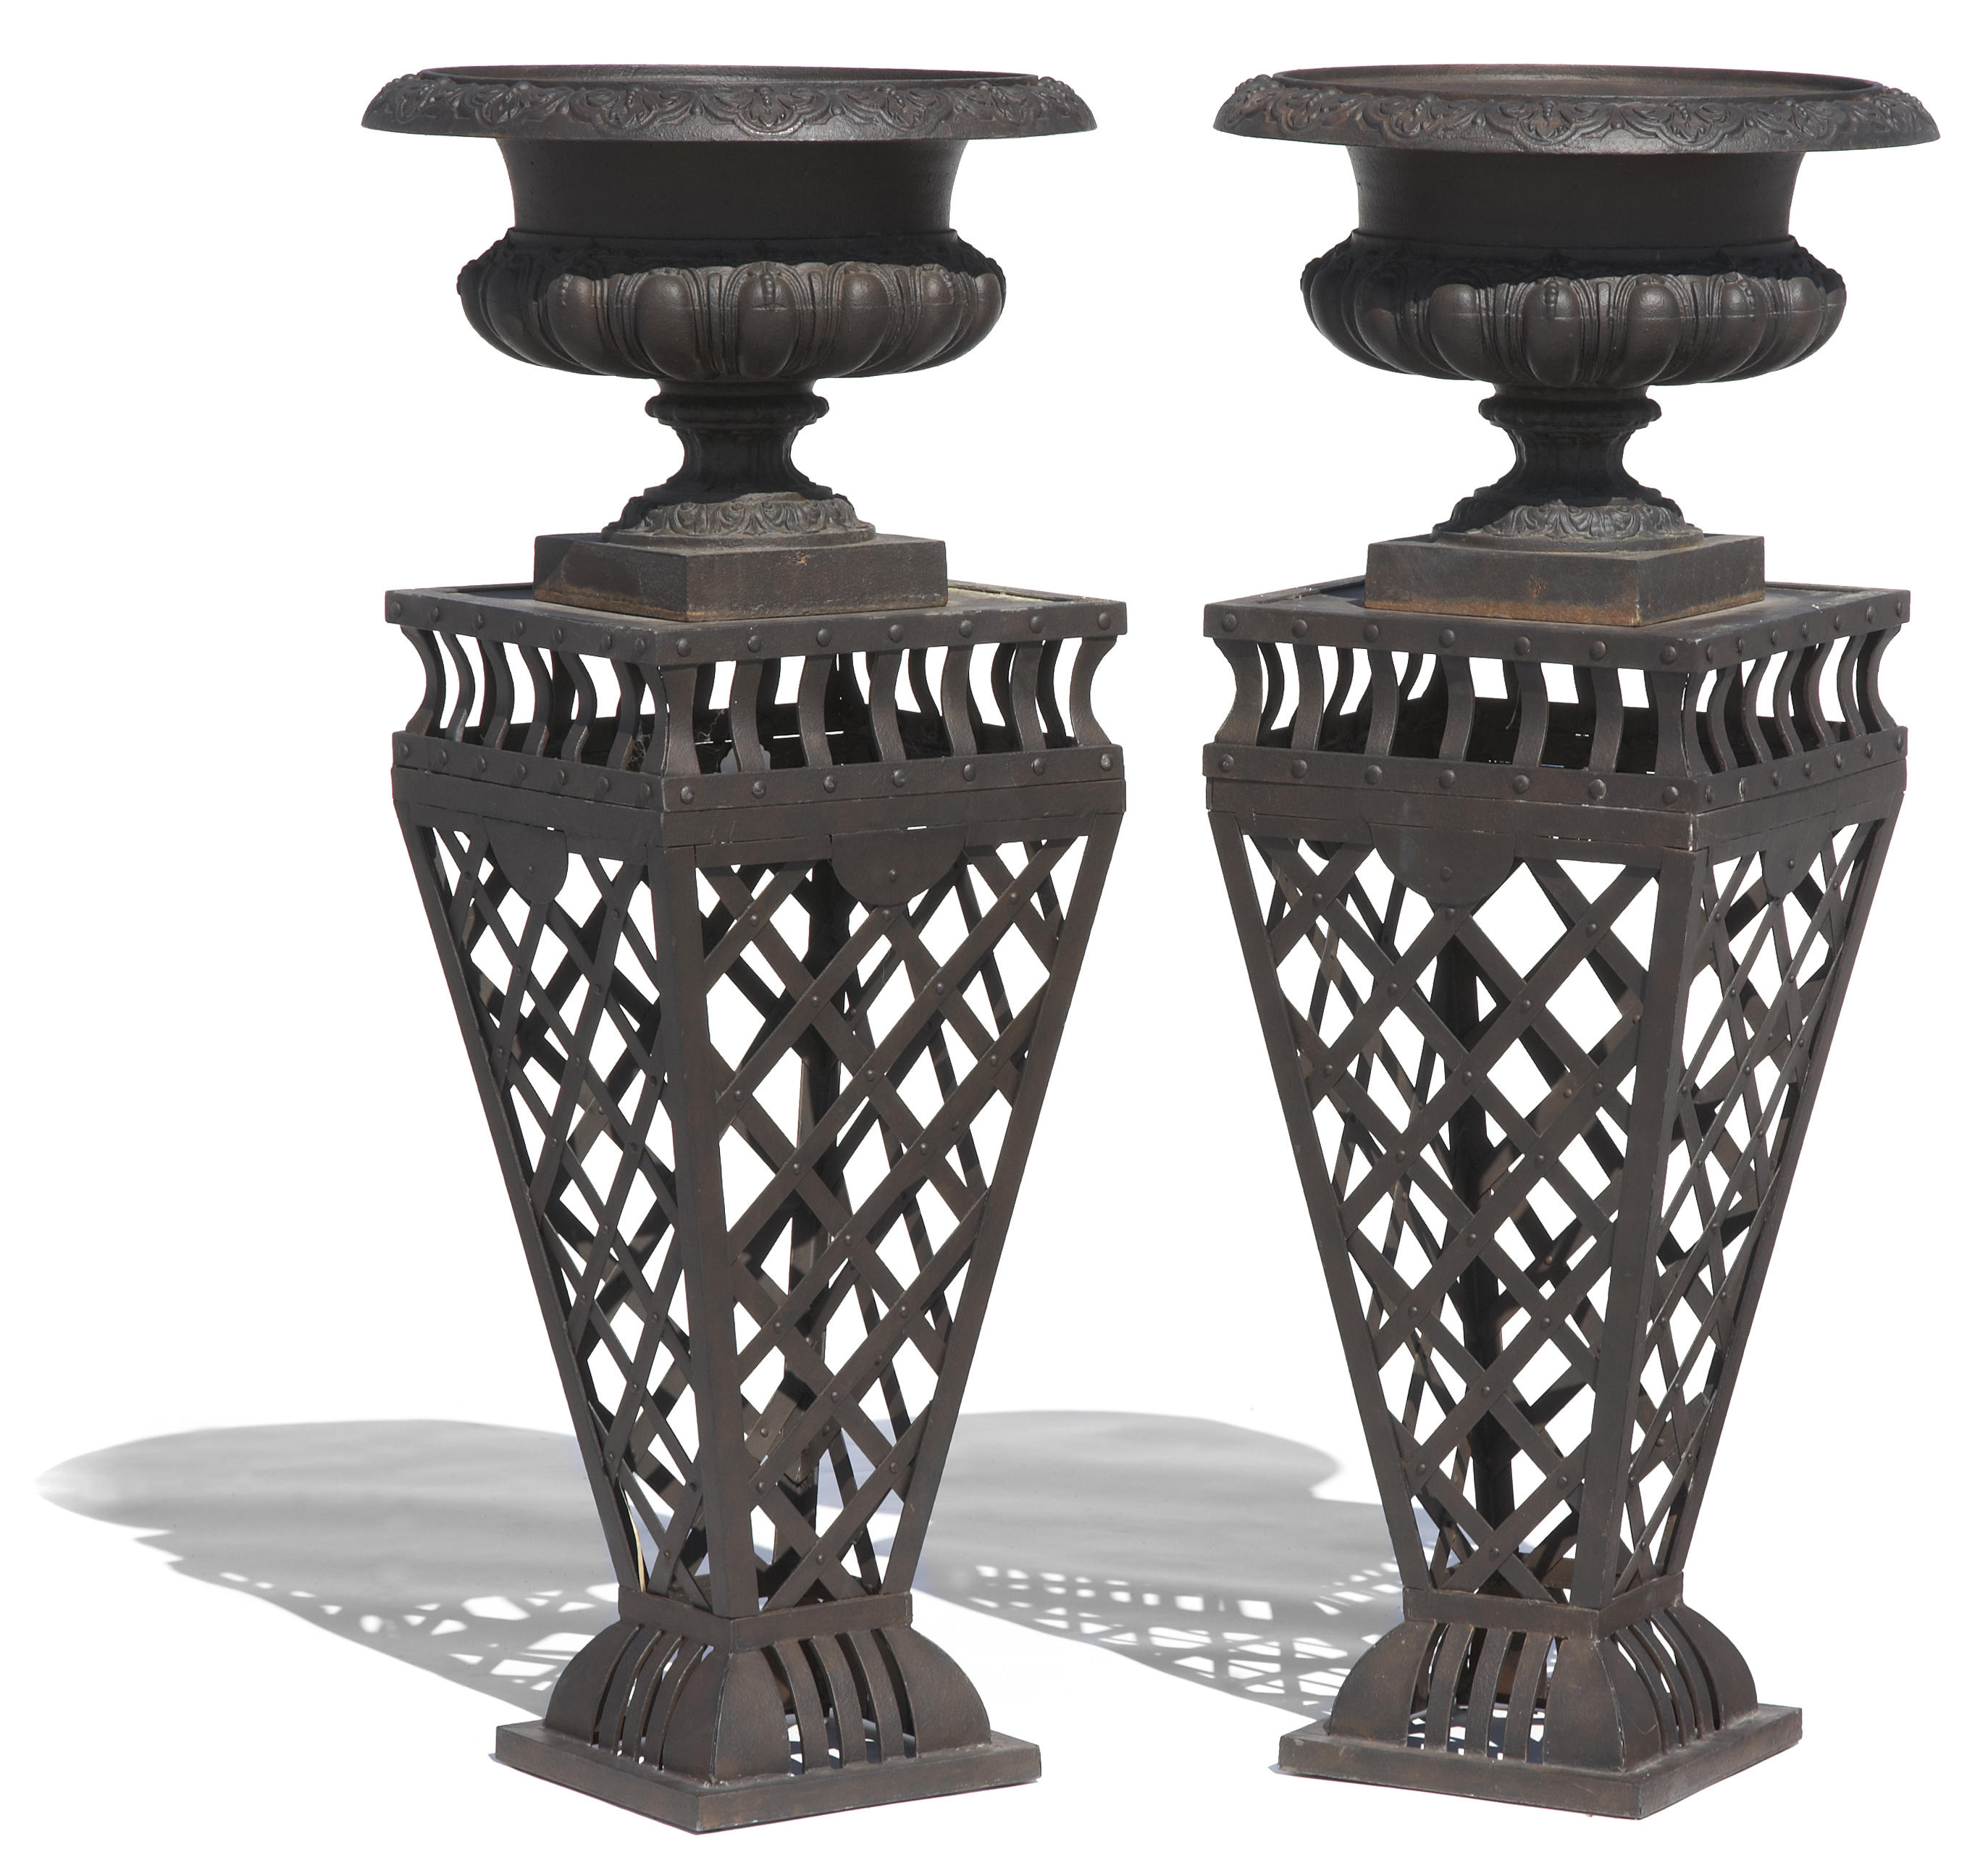 A pair of Neoclassical style cast